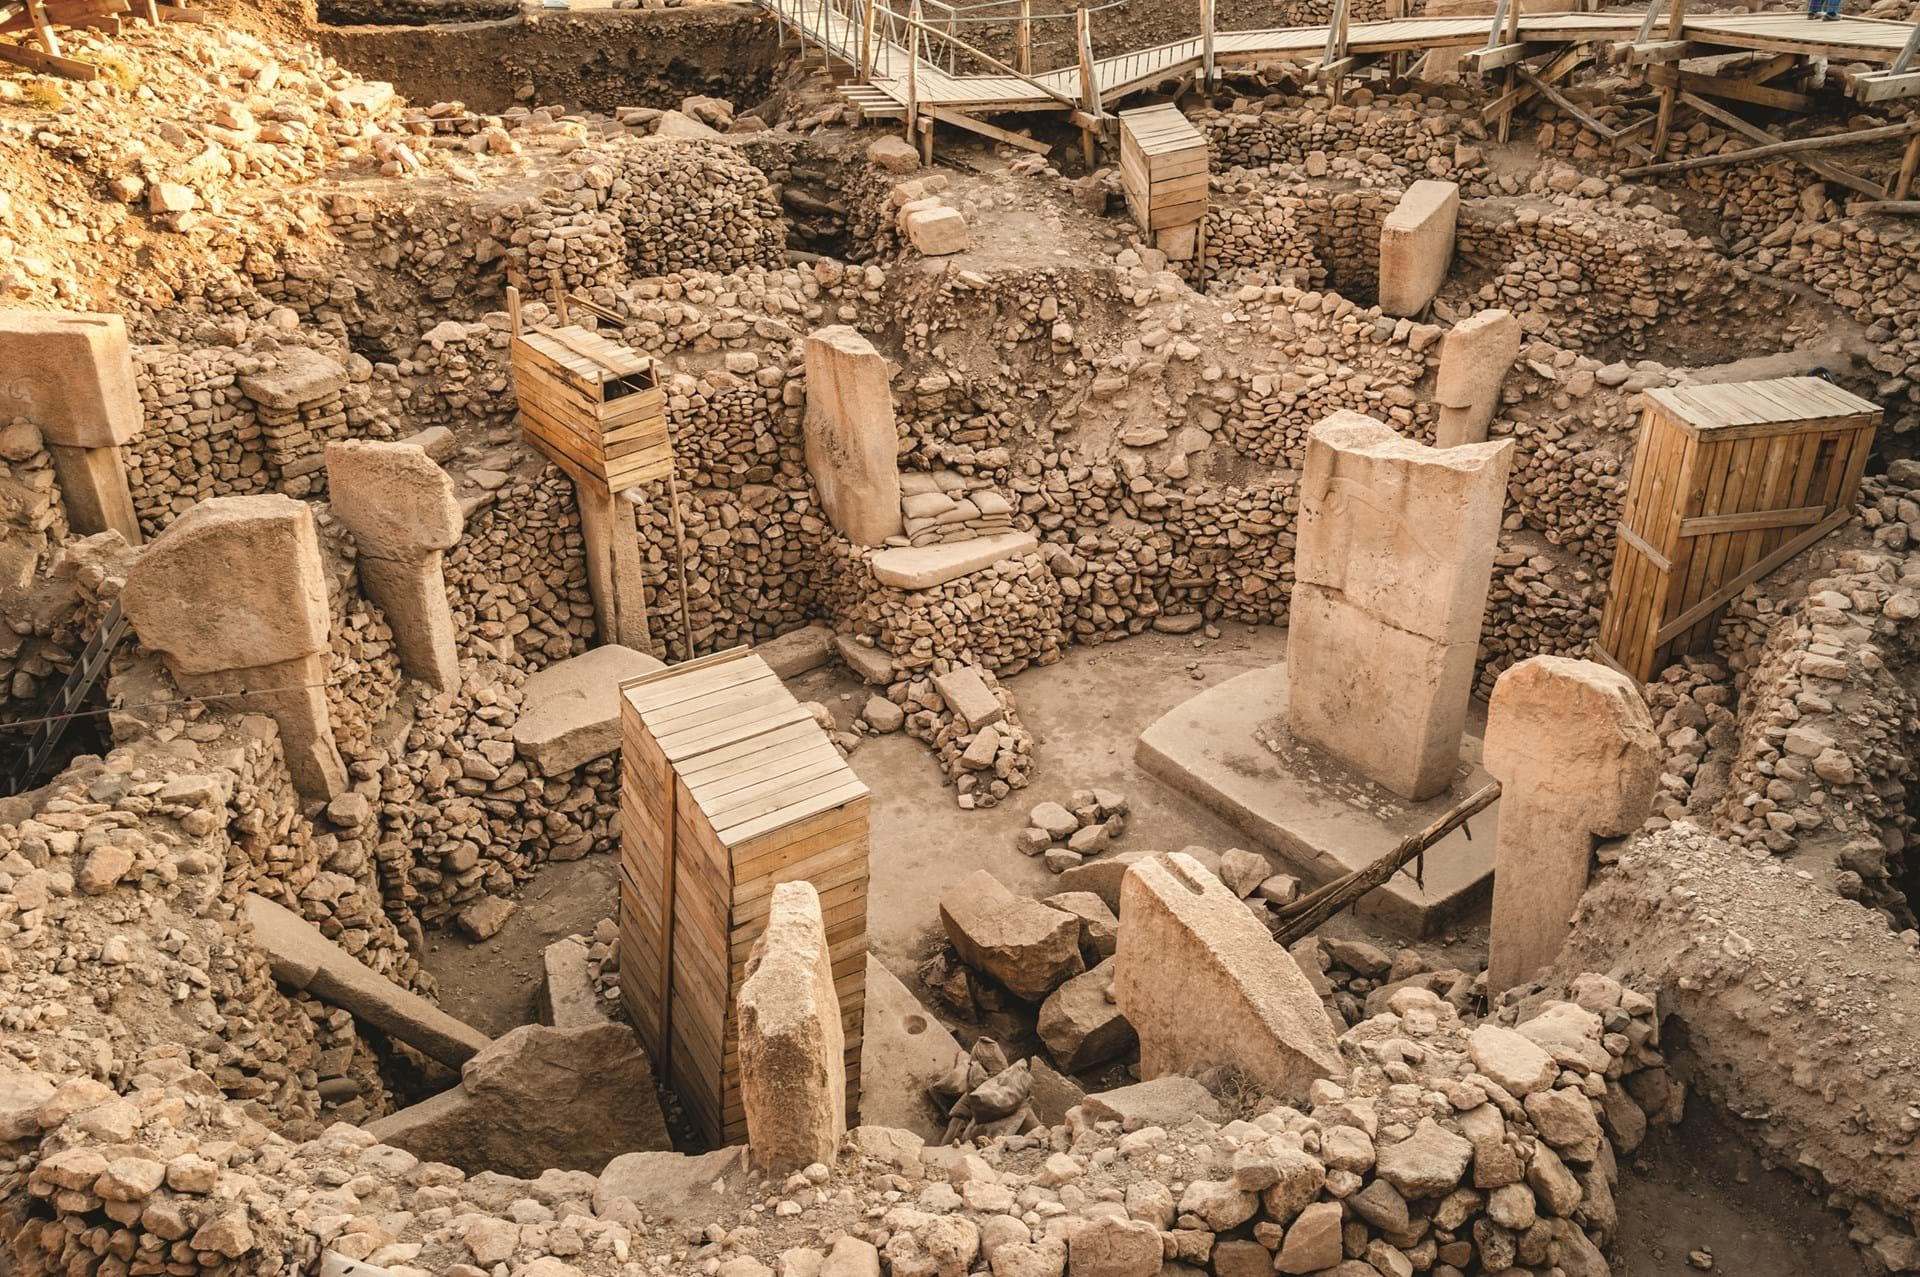 Tick the site of Gobekli Tepe off your bucket list